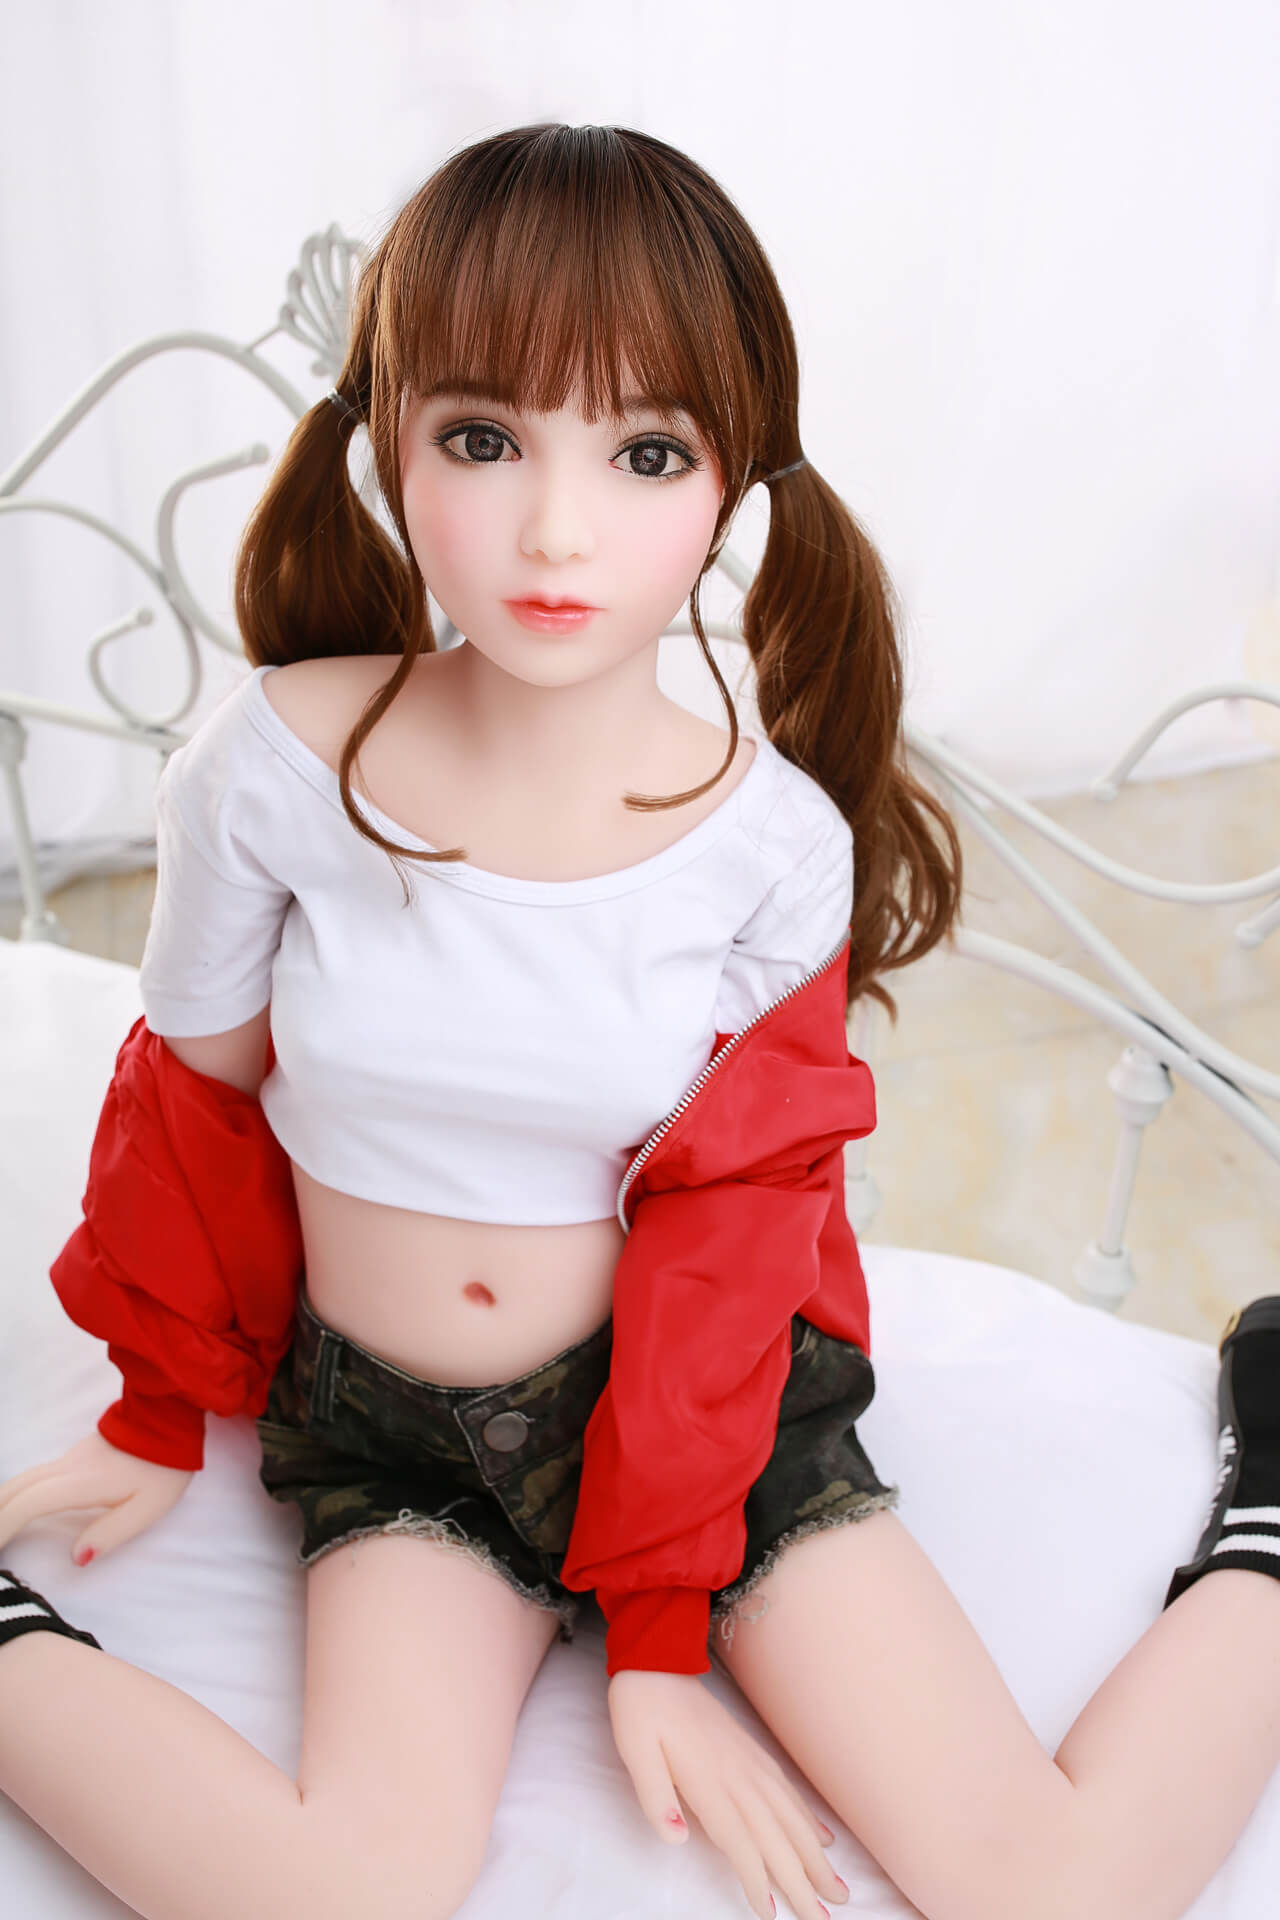 125cm Younger Sex Doll - Ashley